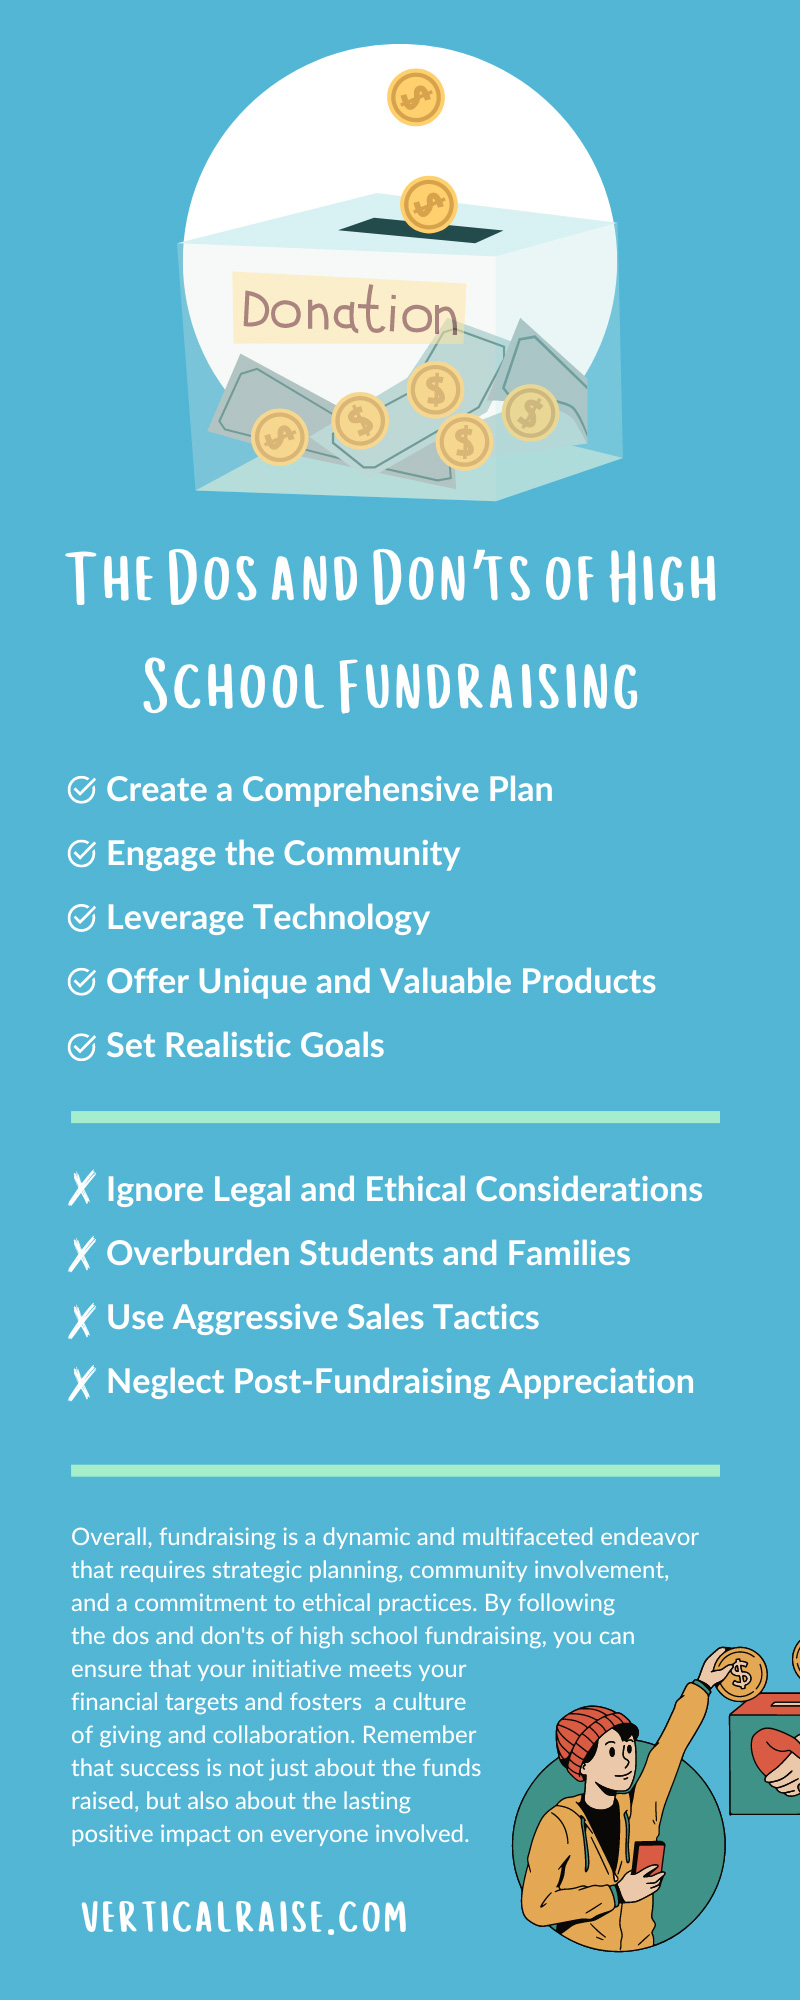 The Dos and Don’ts of High School Fundraising